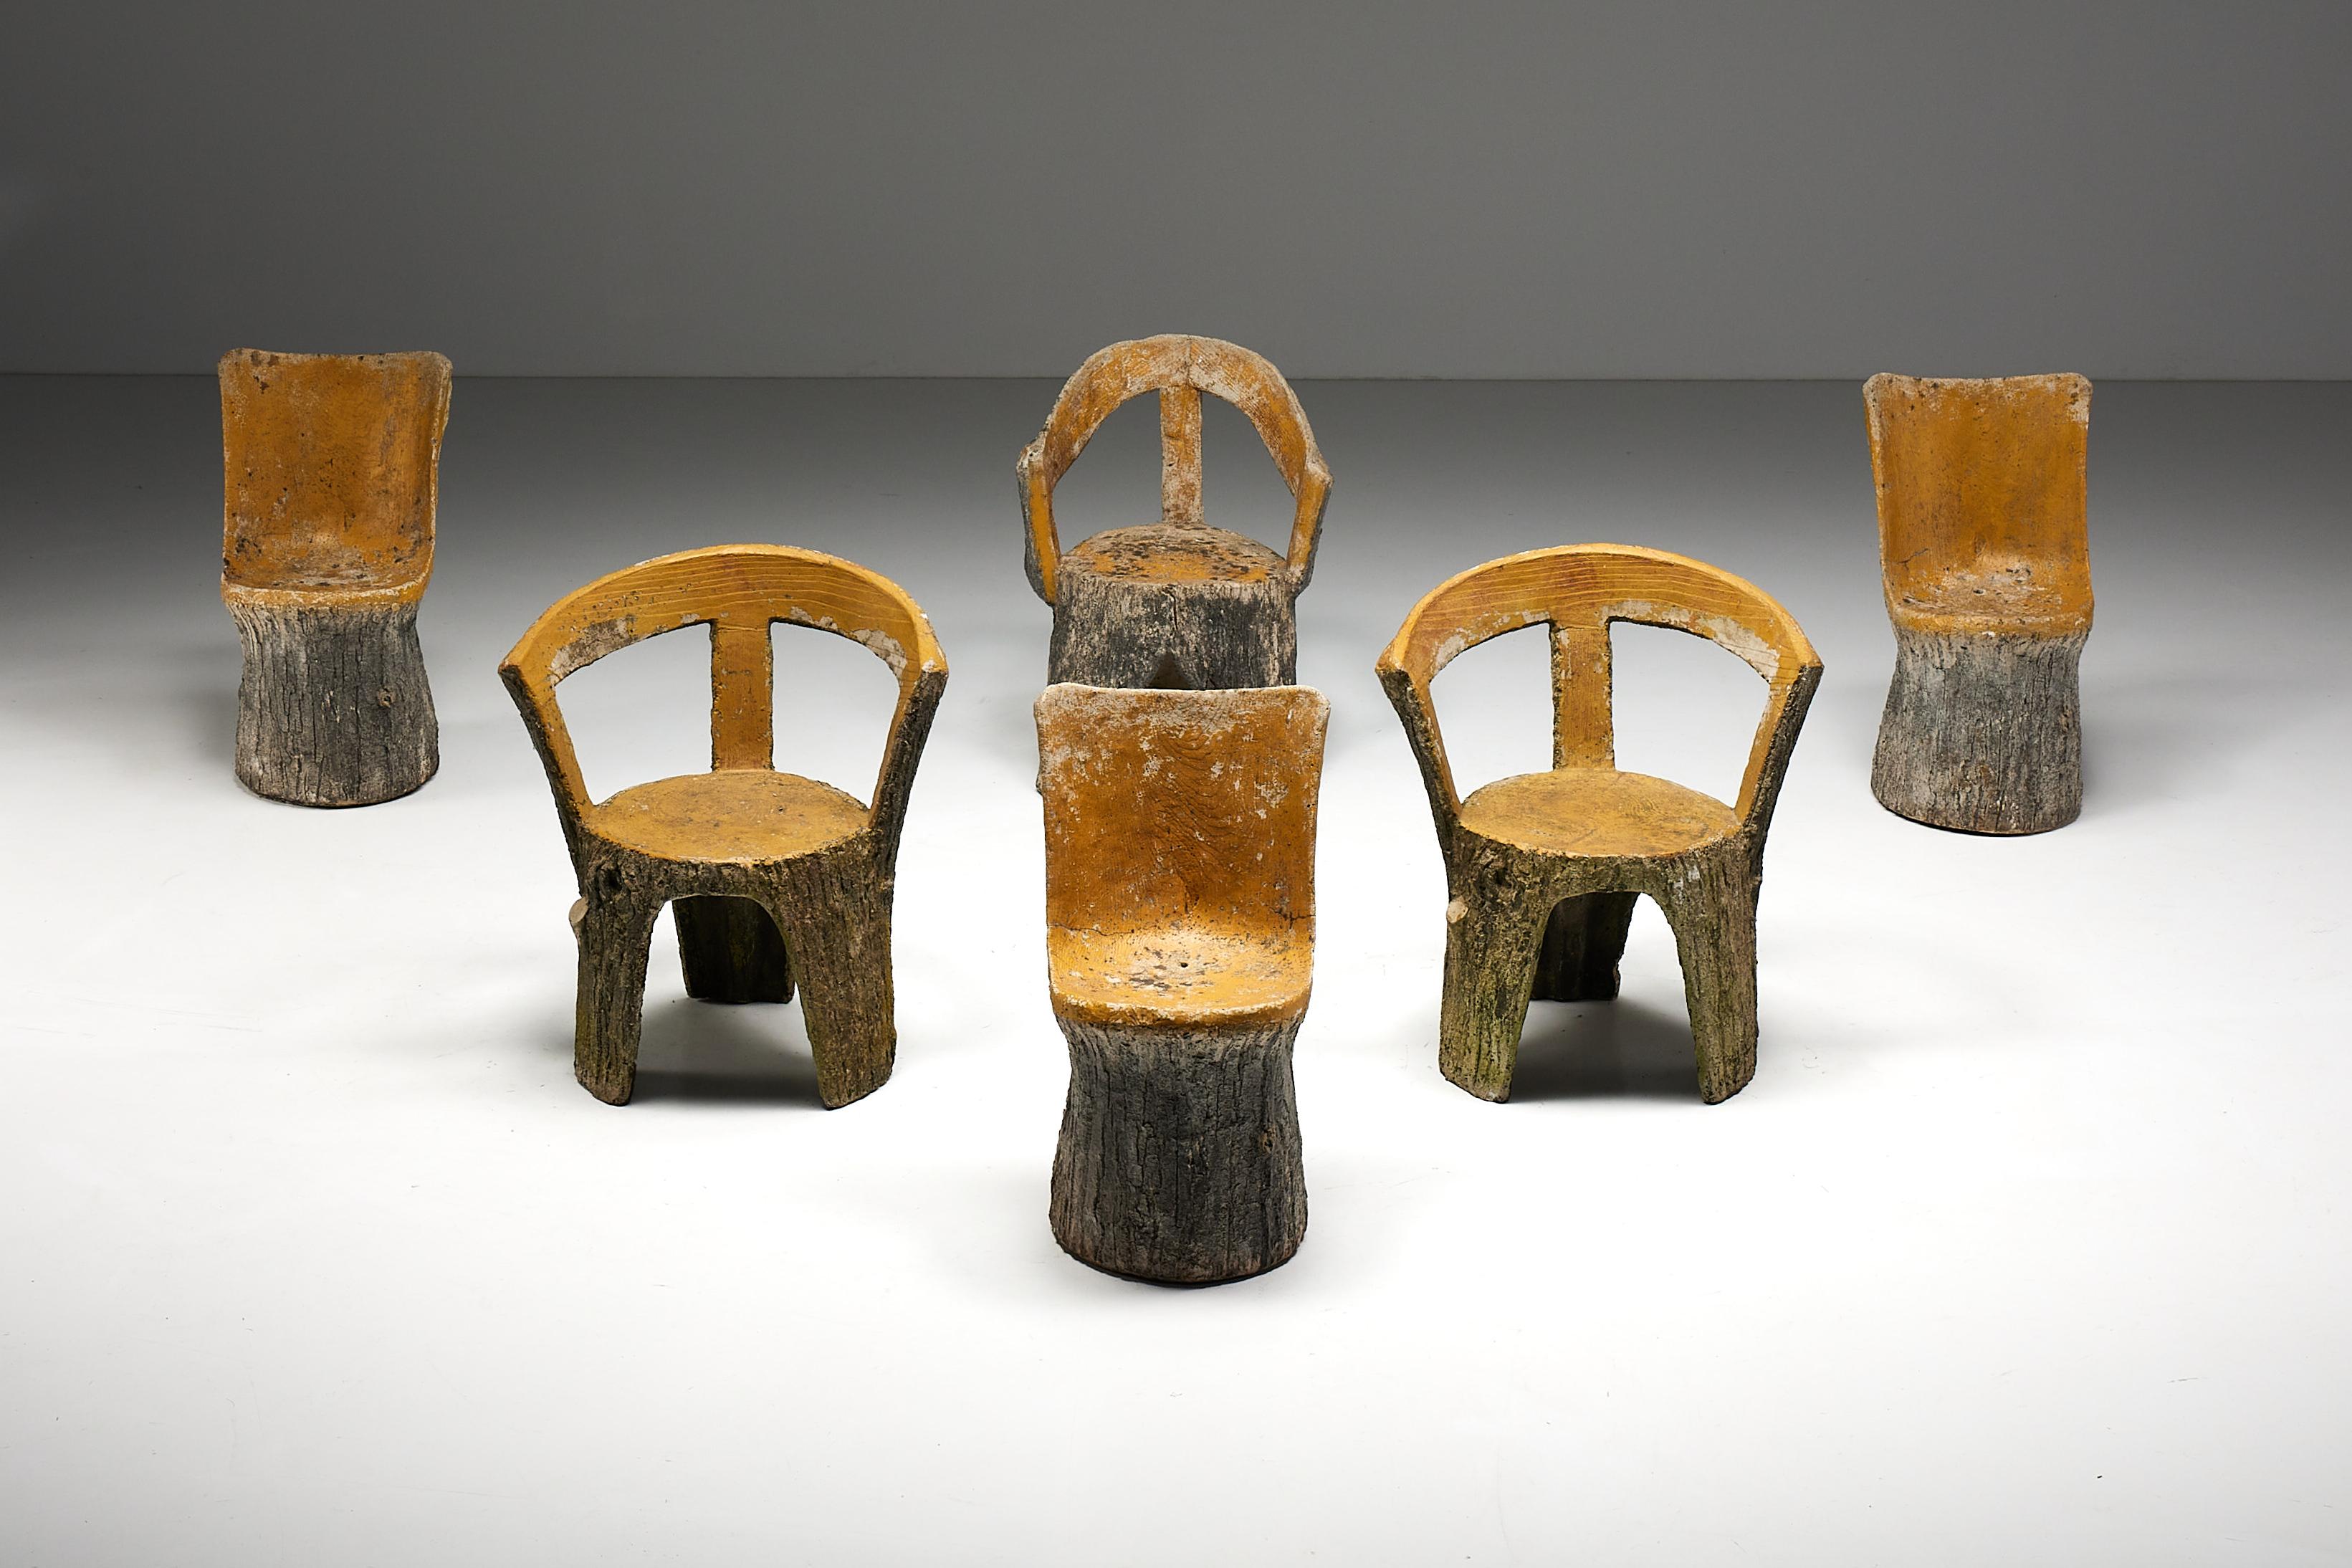 Brutalist Concrete Chairs, France, 1970s For Sale 7